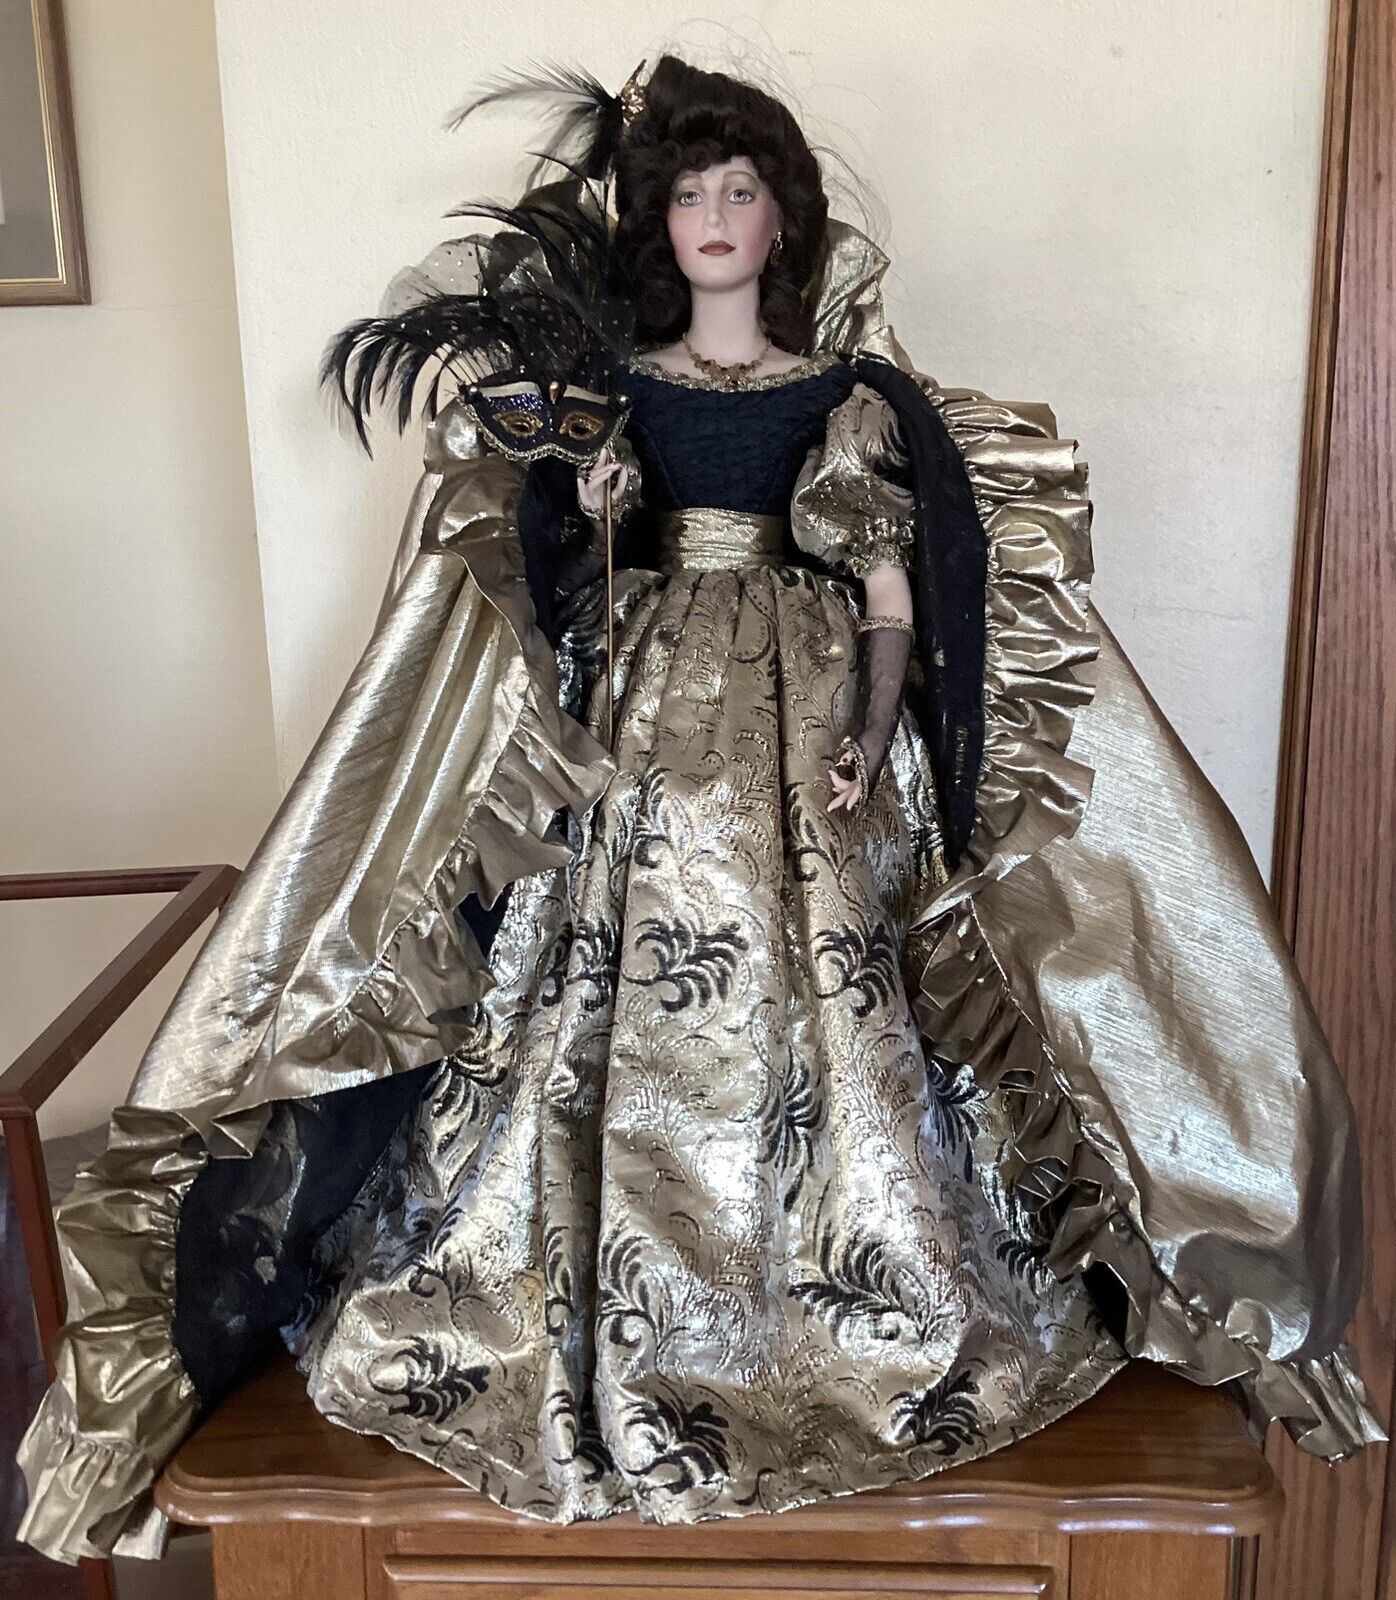 Franklin Heirloom Queen of the Masquerade Ball Porcelain Doll; W/ Display Case